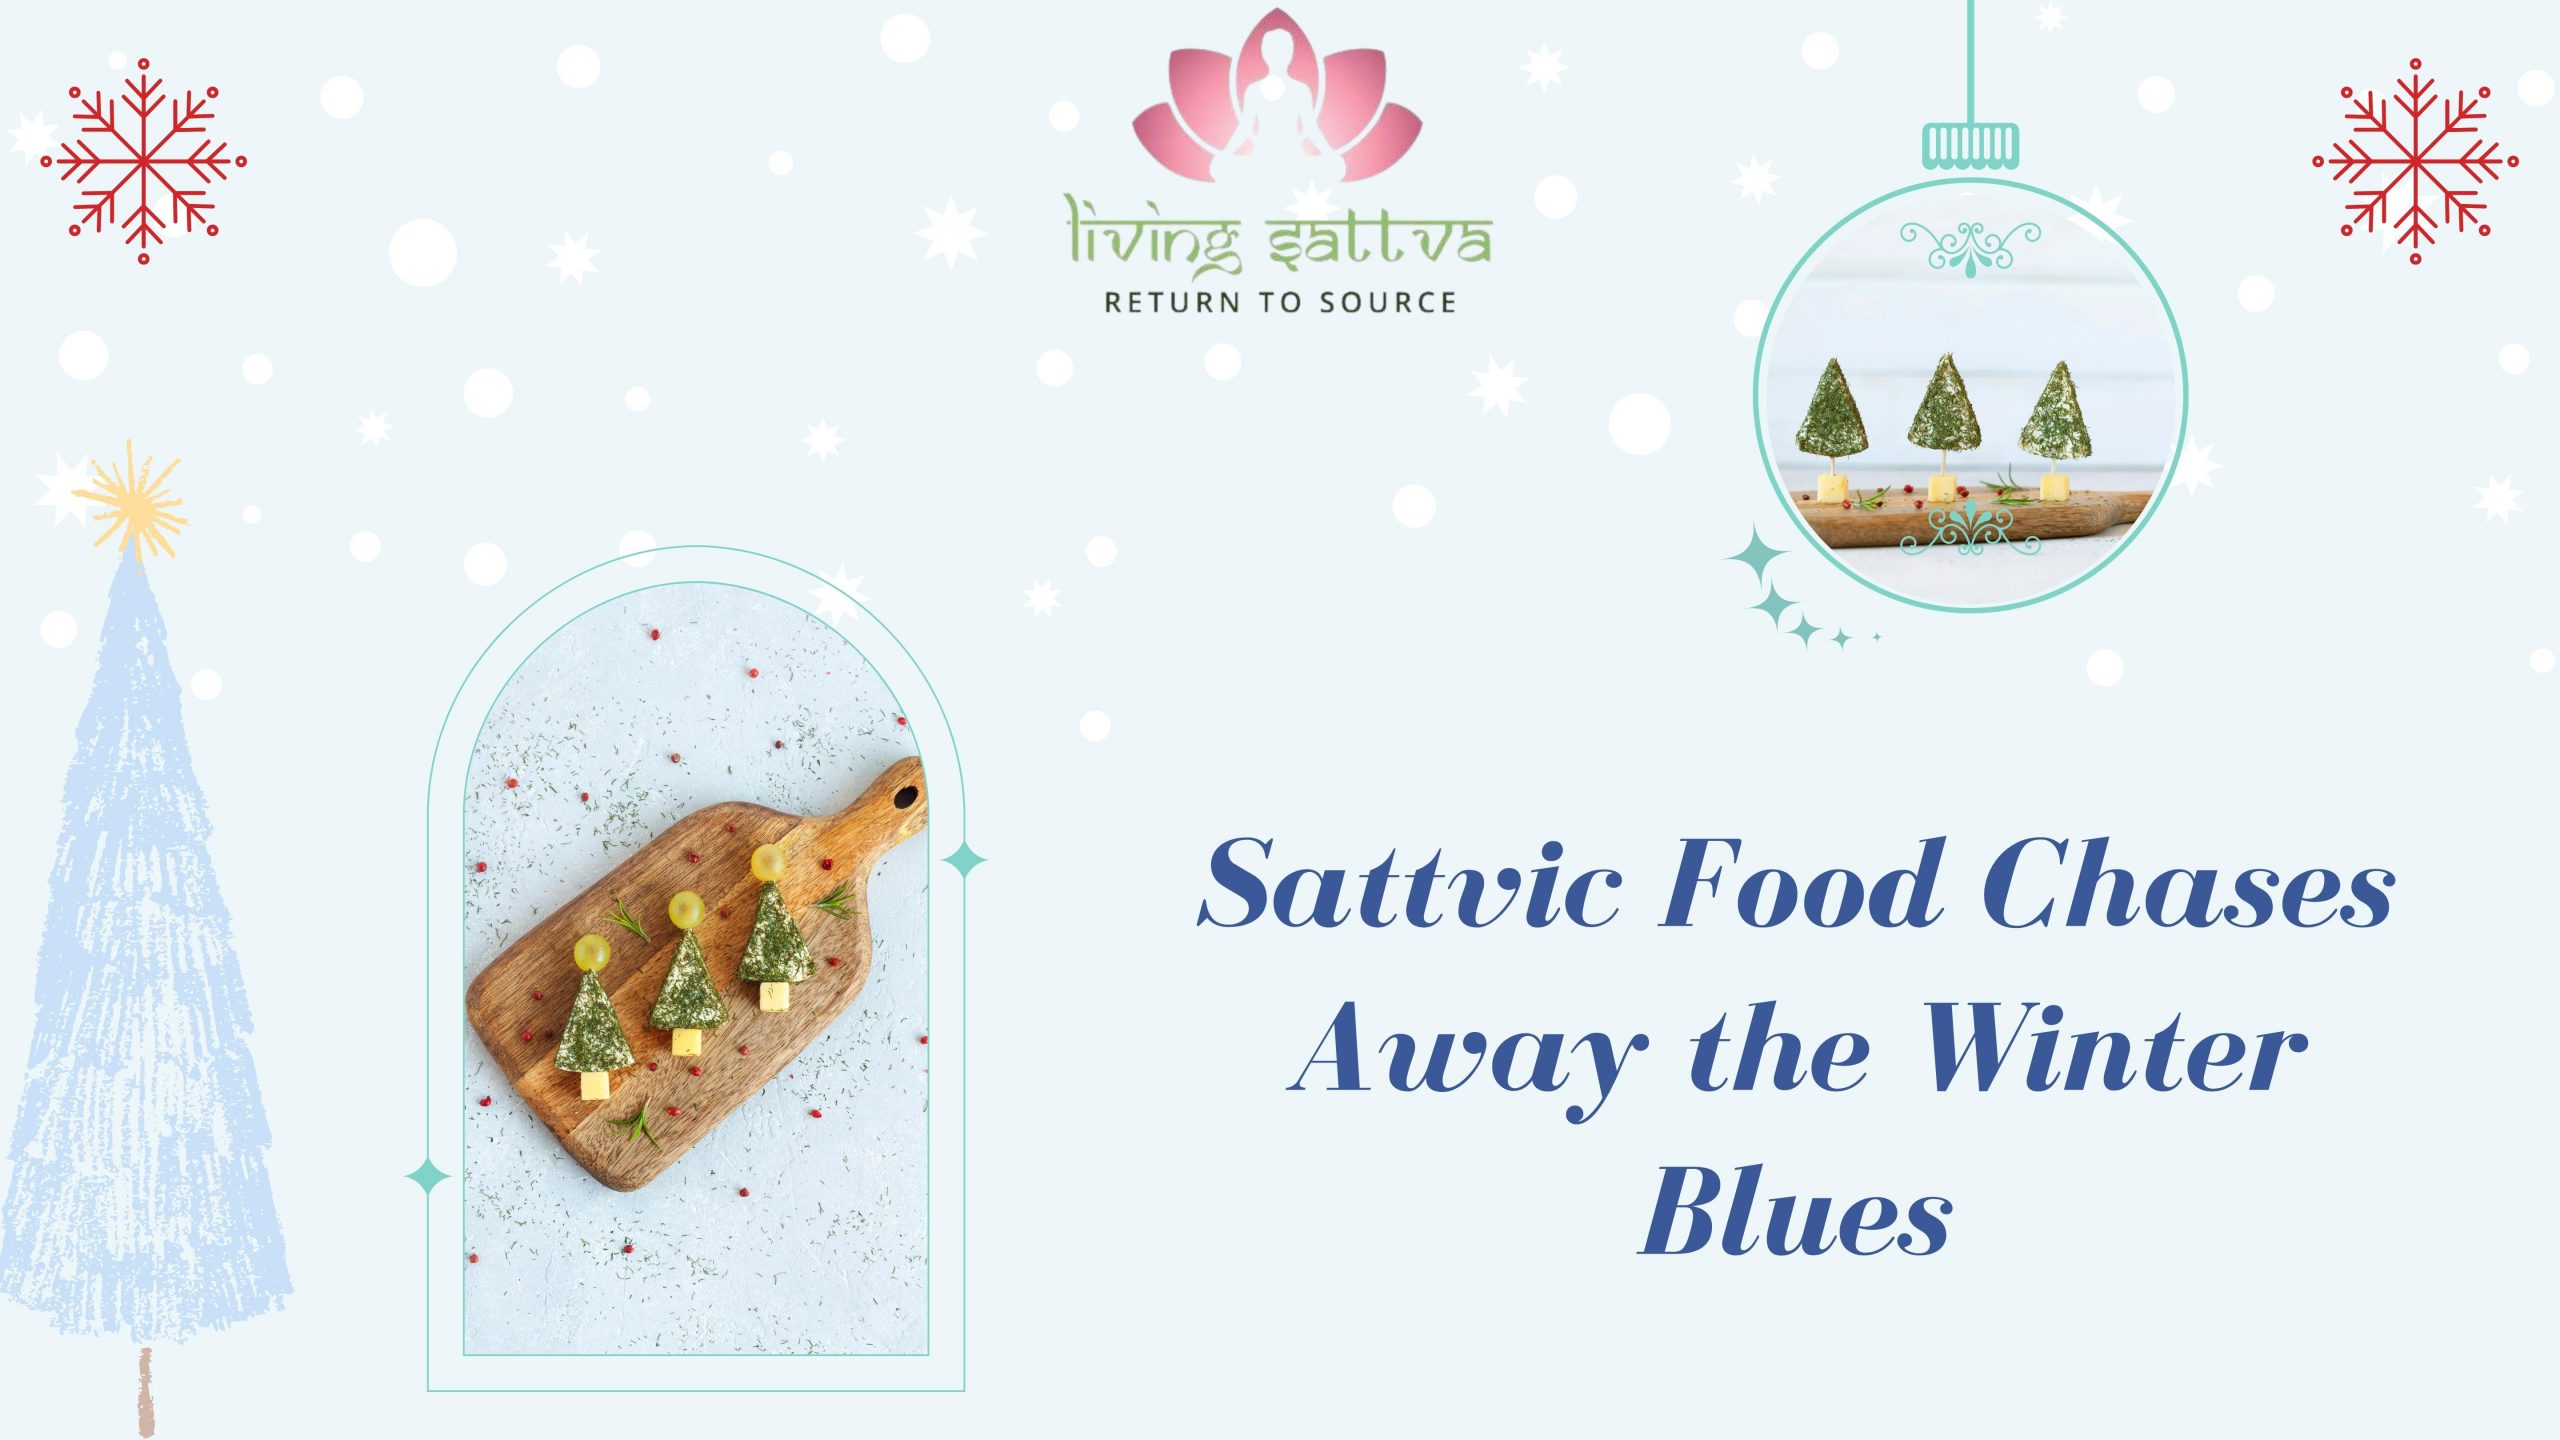 Sattvic Food Chases Away the Winter Blues